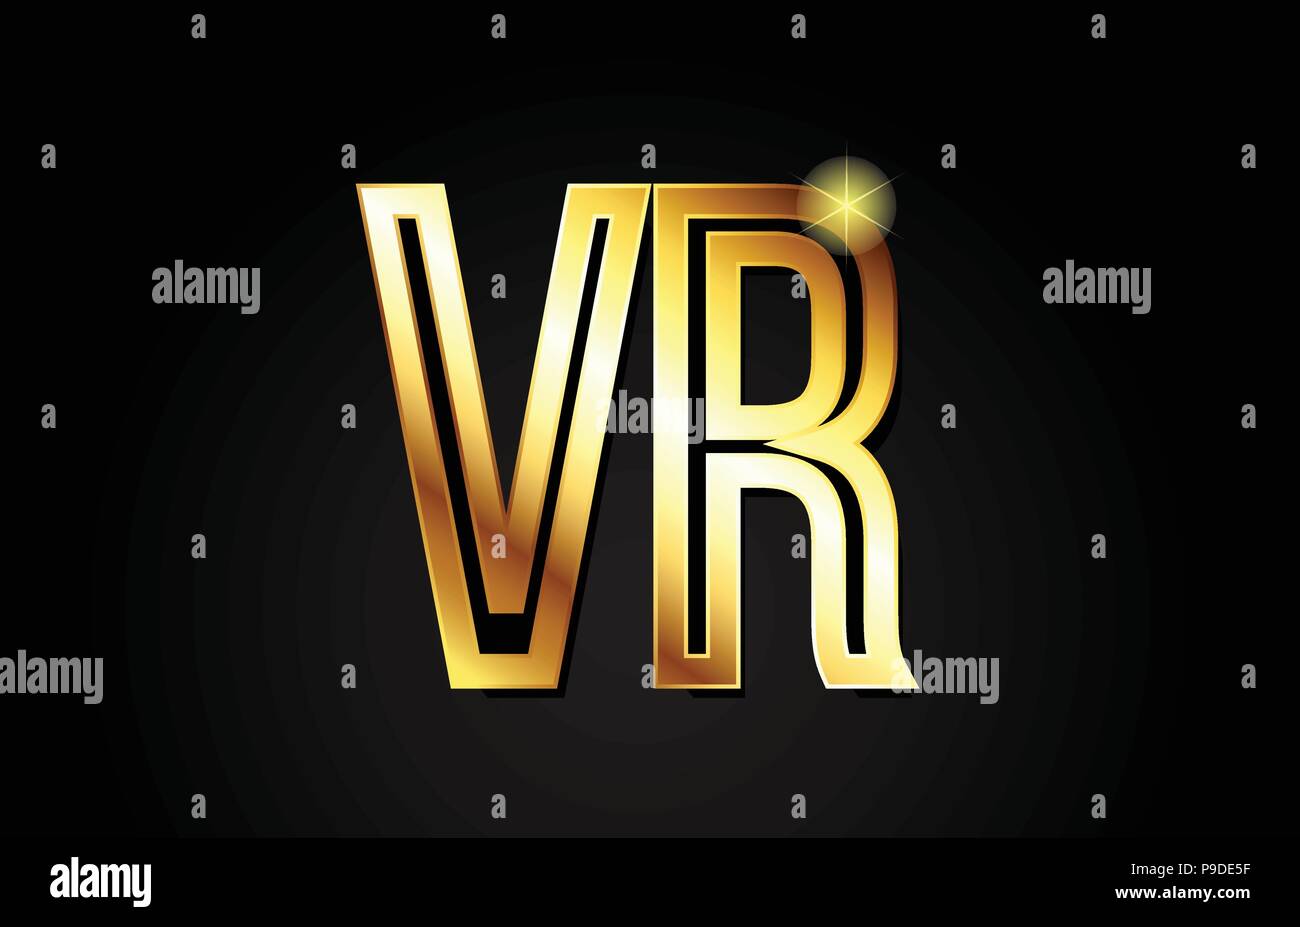 Gold Alphabet Letter Vr V R Logo Combination Design Suitable For A Company Or Business Stock Vector Image Art Alamy